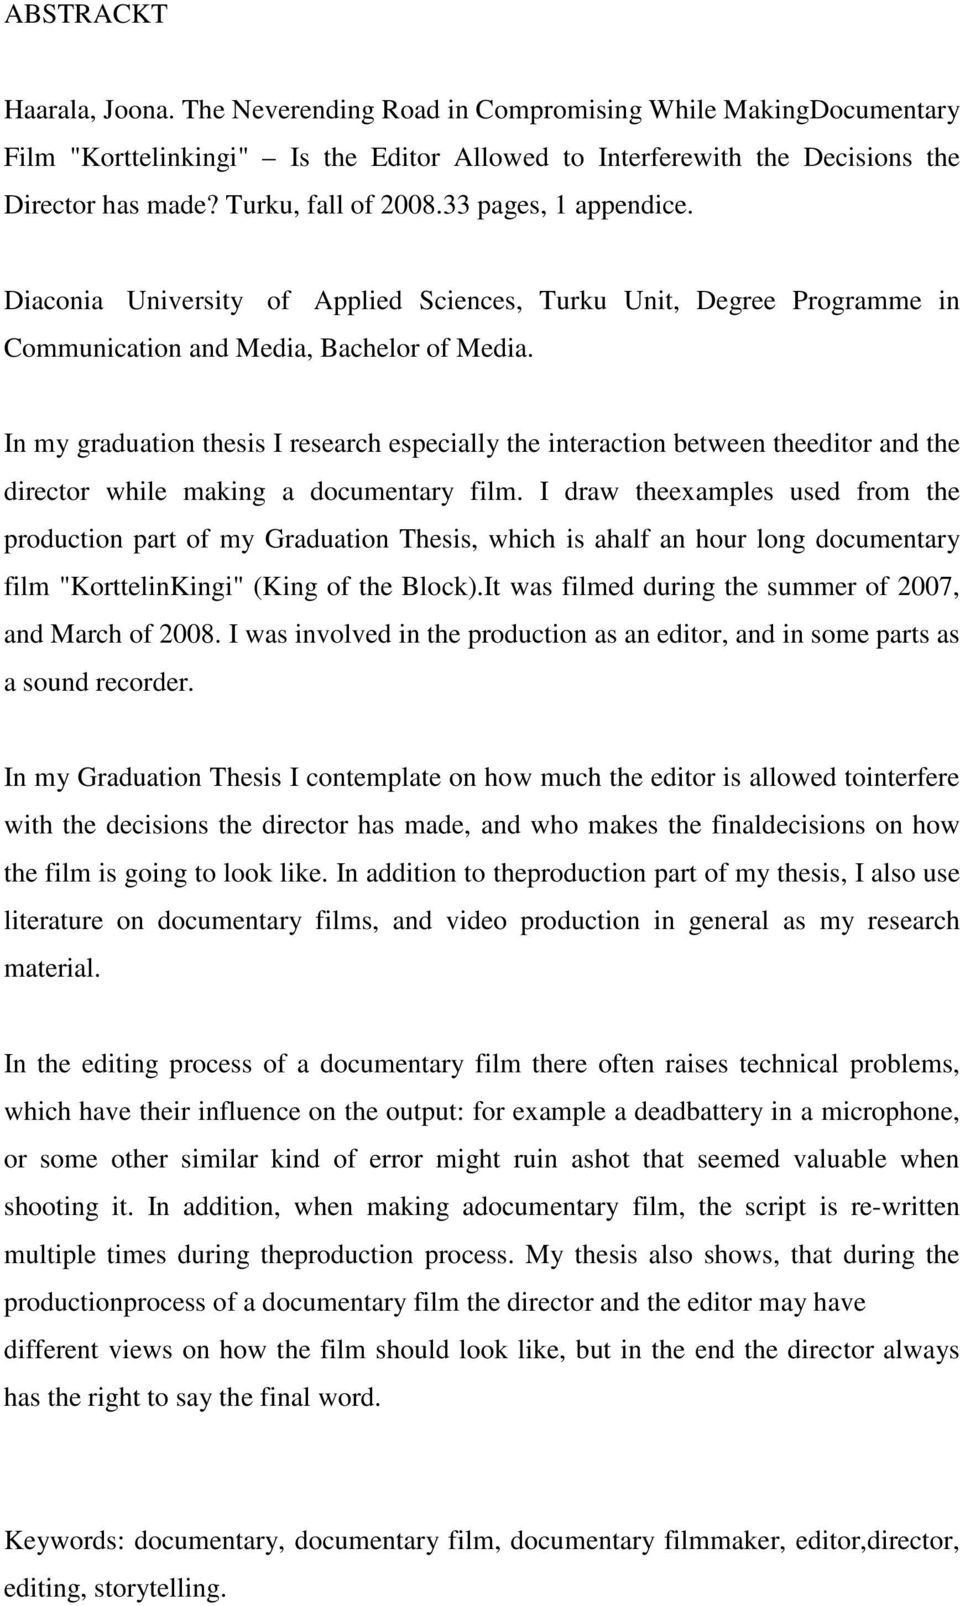 In my graduation thesis I research especially the interaction between theeditor and the director while making a documentary film.